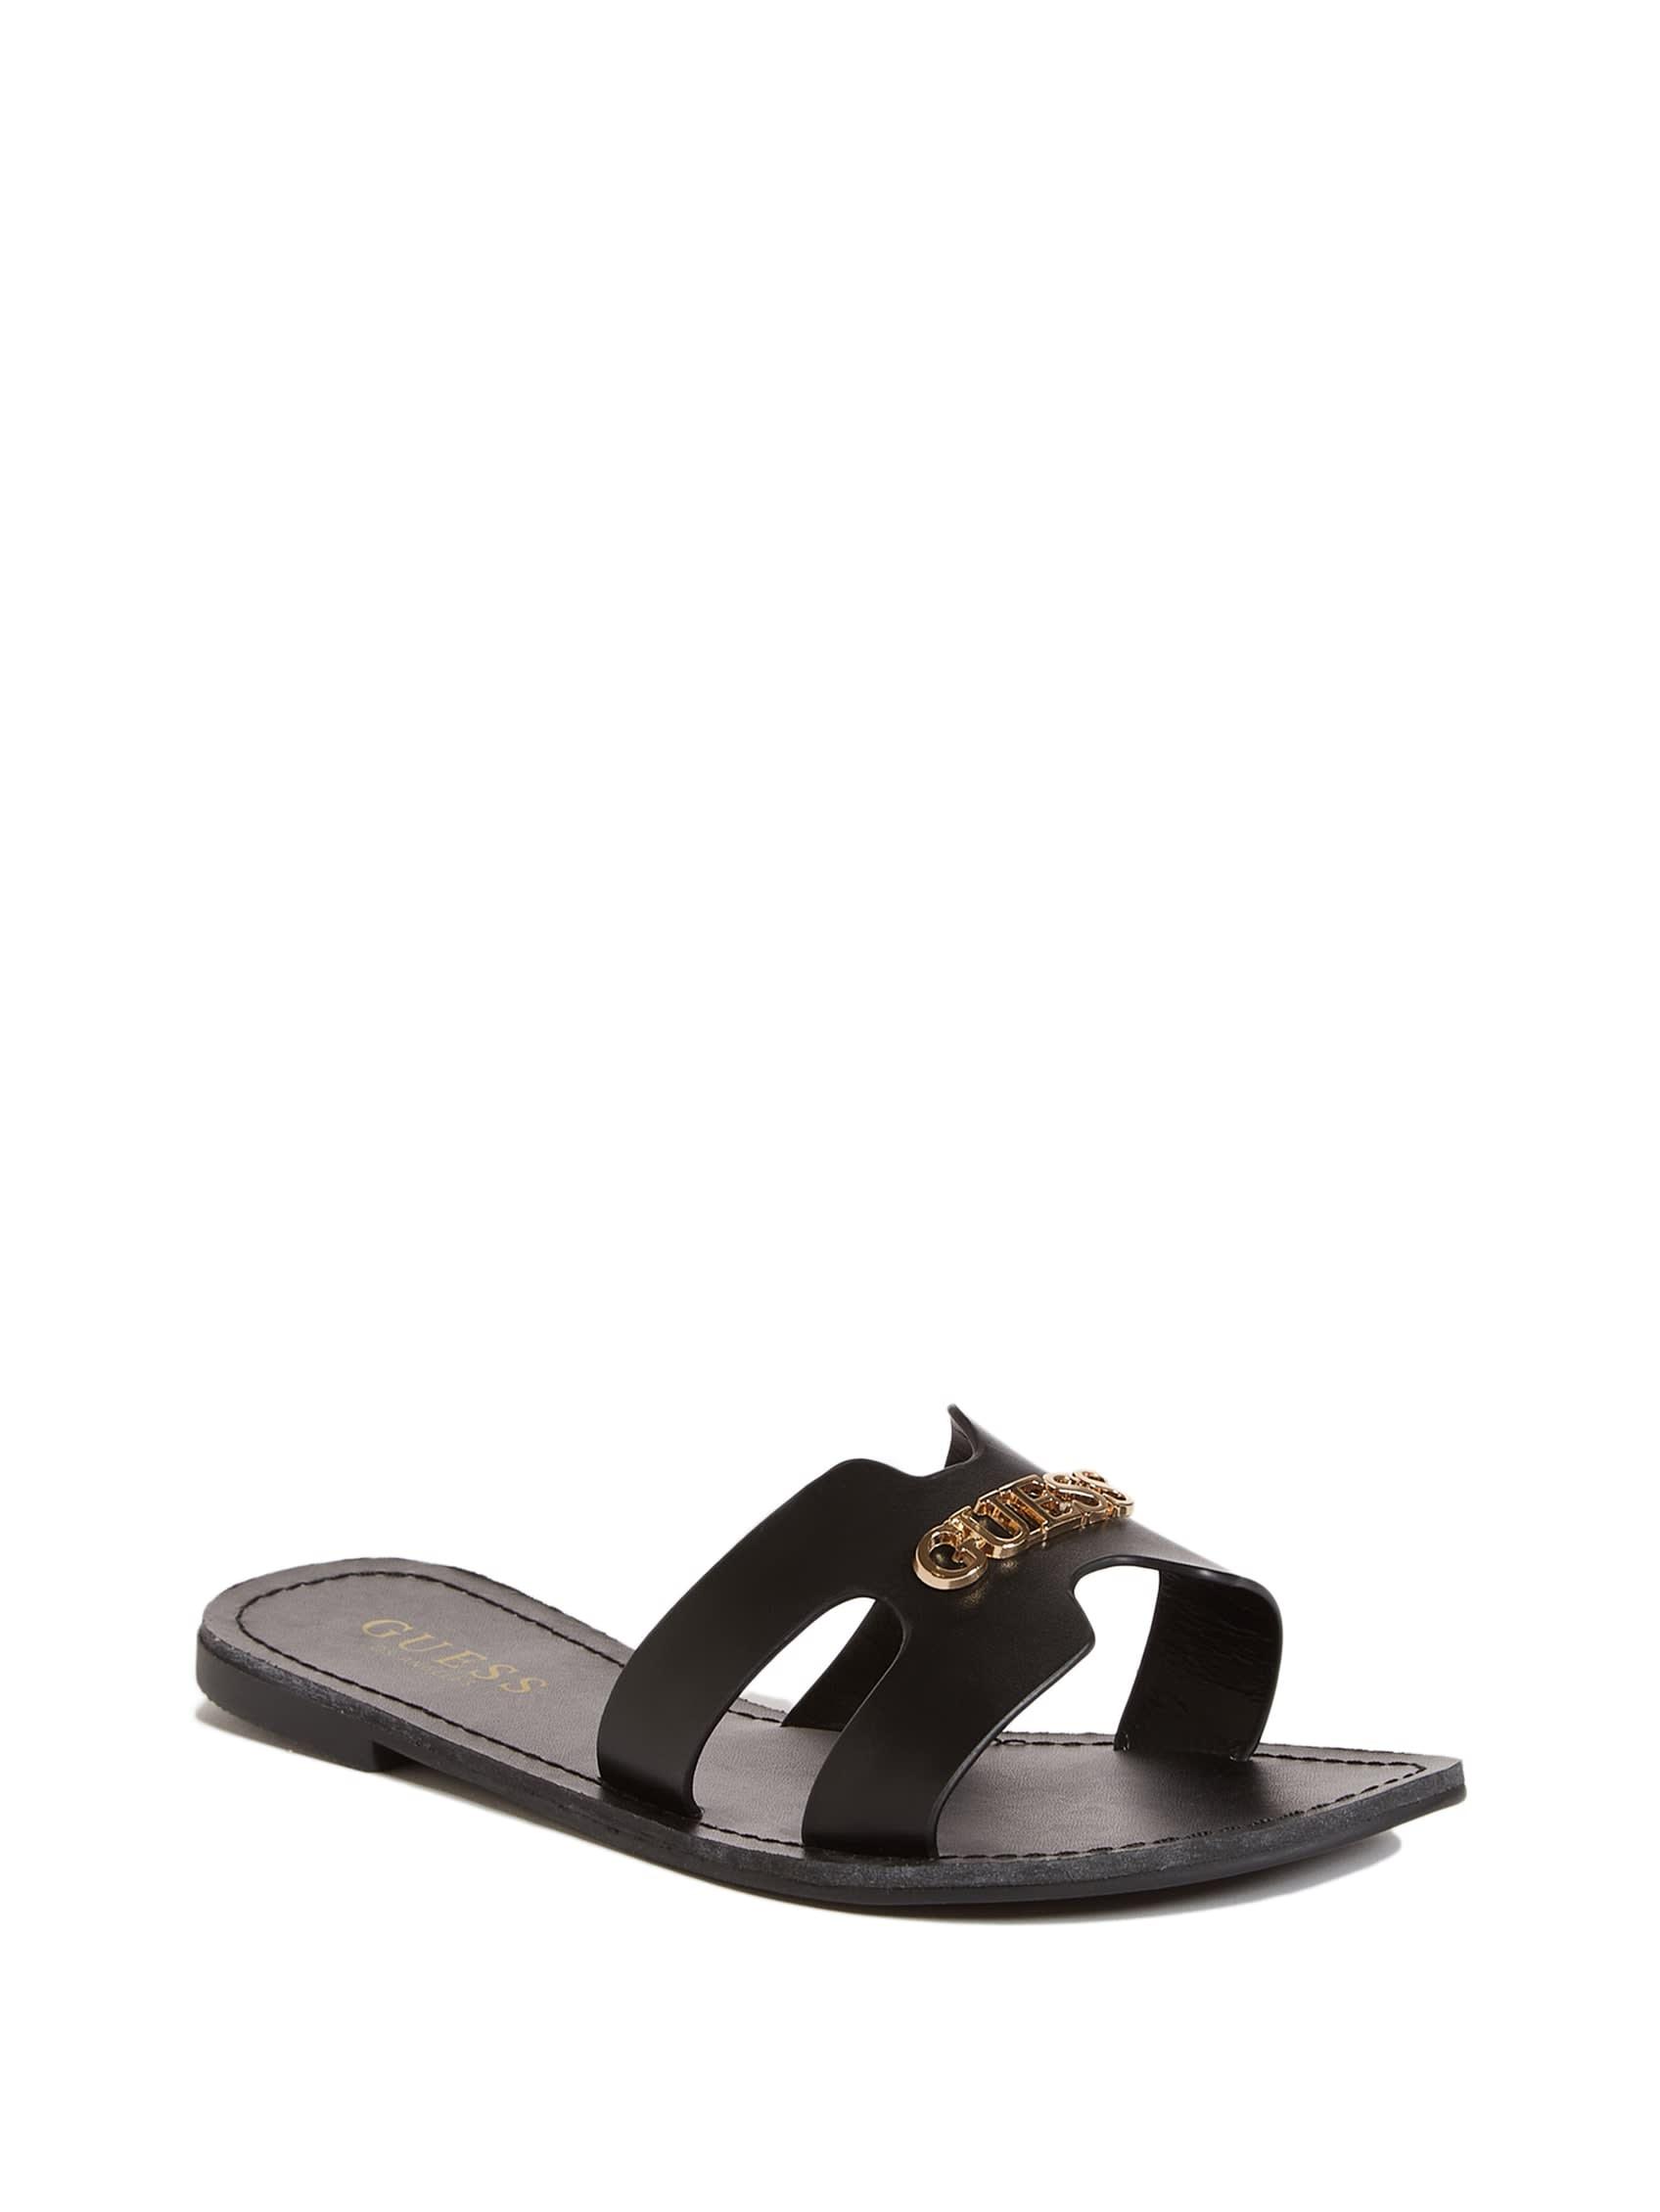 Guess Factory Isabell Slide Sandals in Black | Lyst